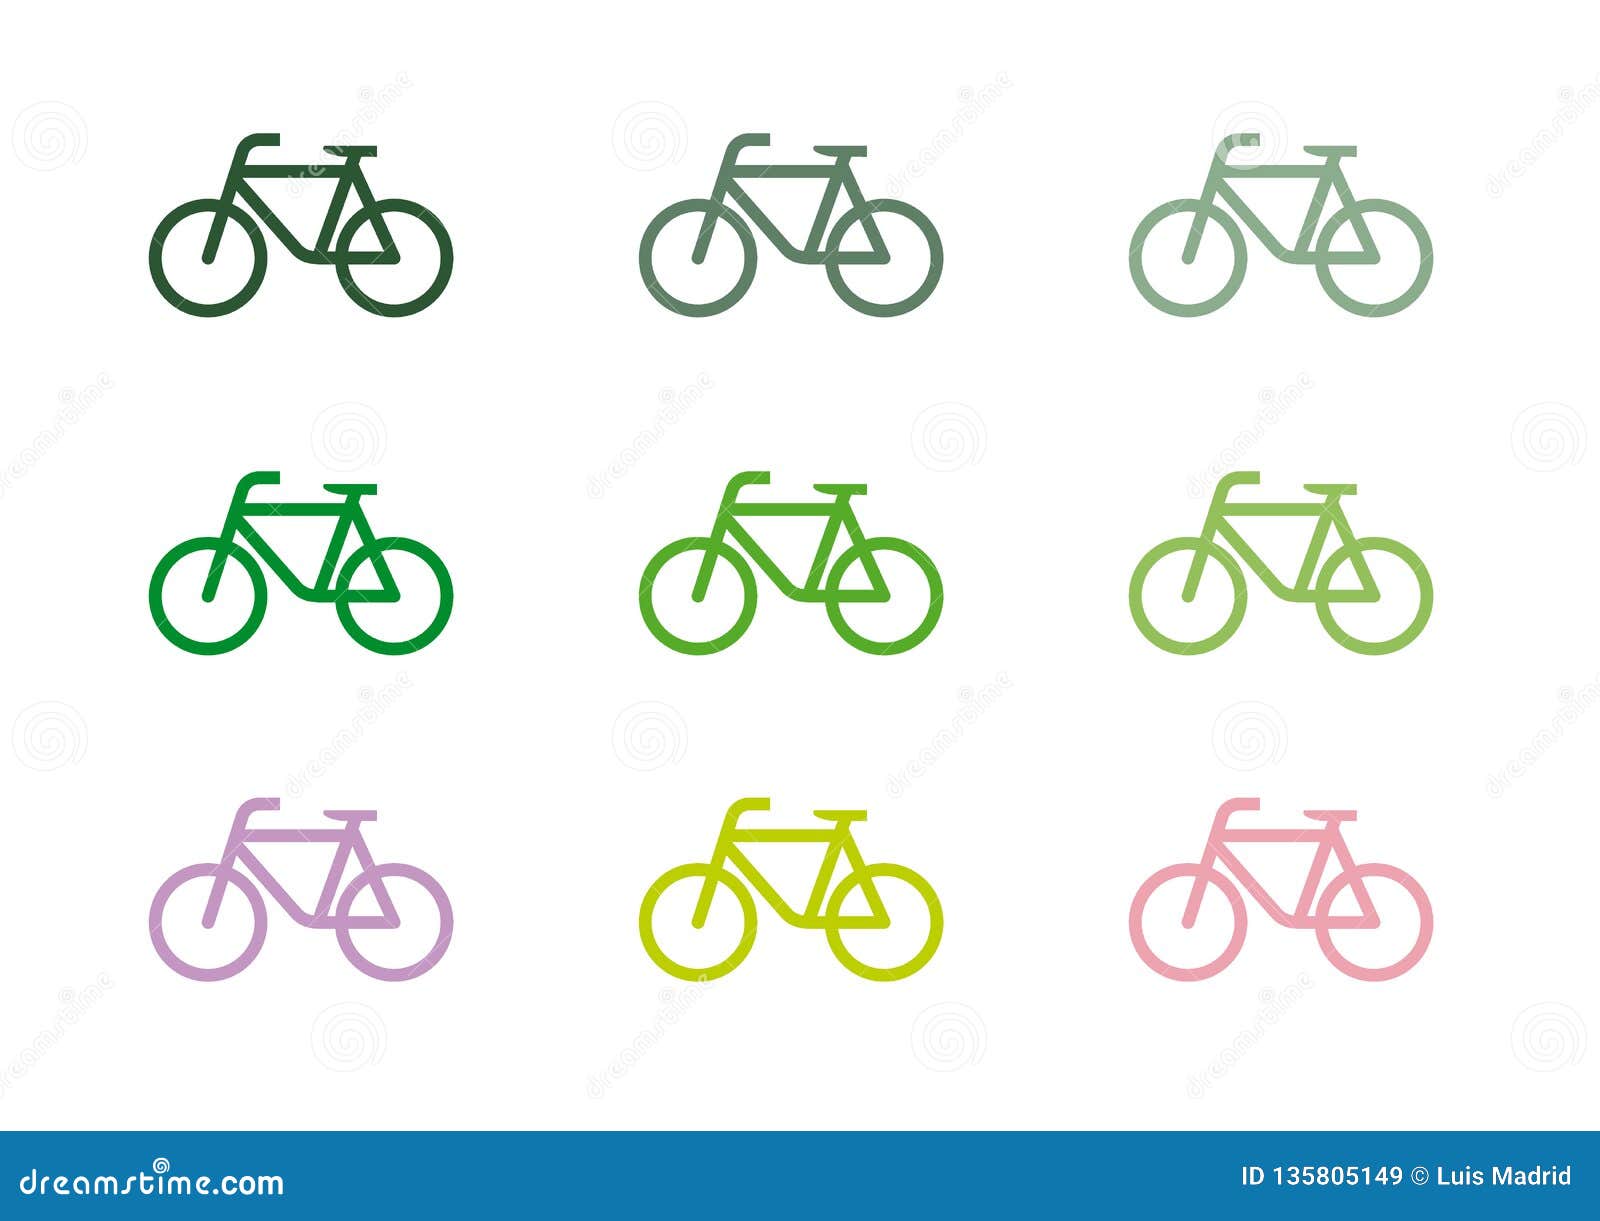 set of nine images of a bicycle of different shades of green